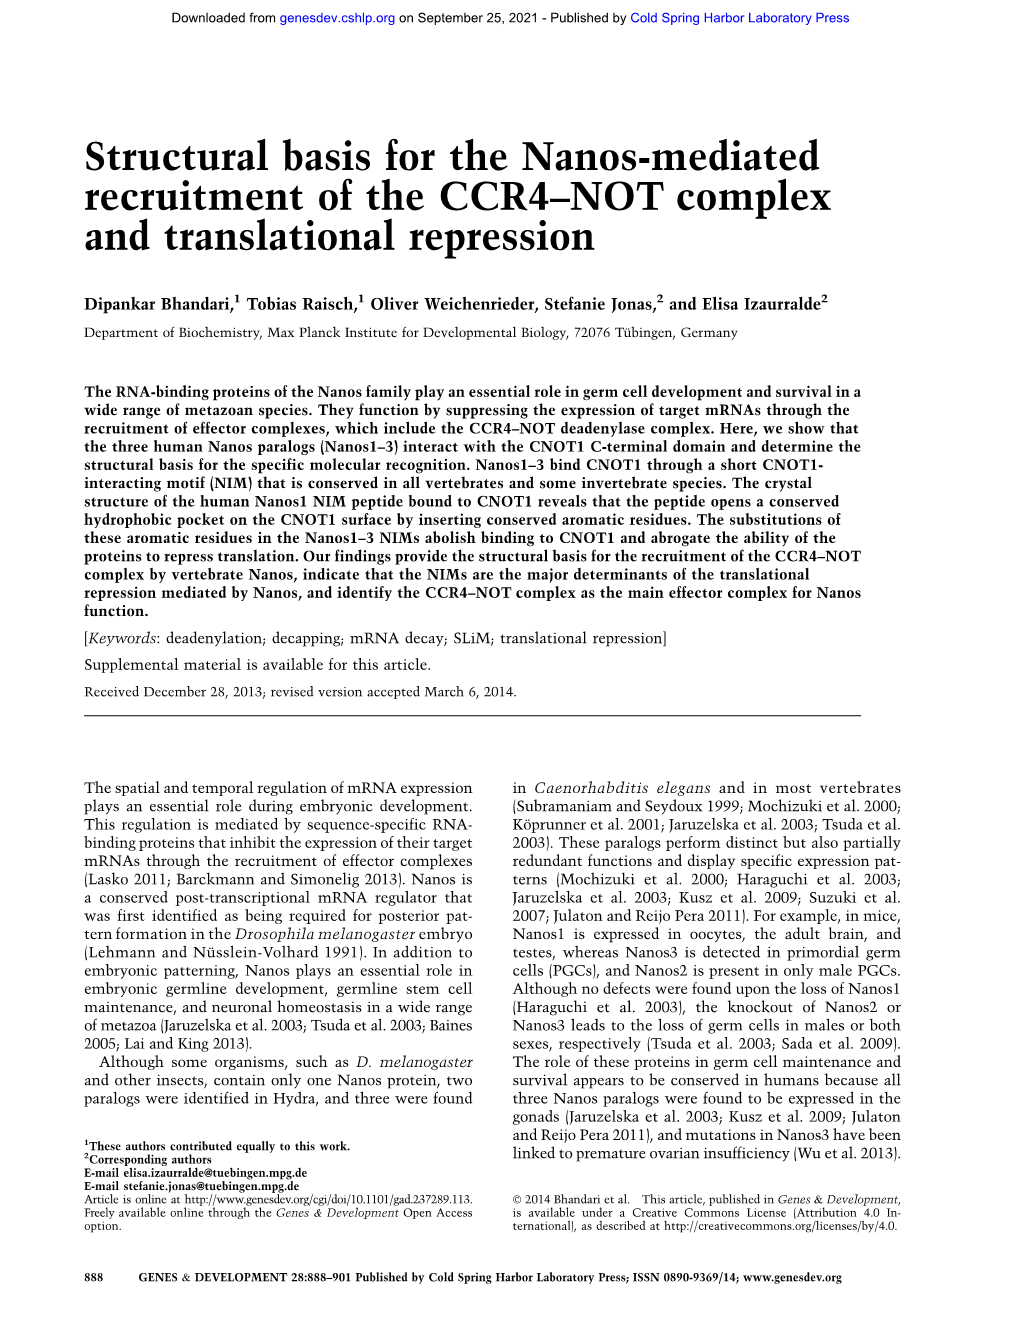 Structural Basis for the Nanos-Mediated Recruitment of the CCR4–NOT Complex and Translational Repression